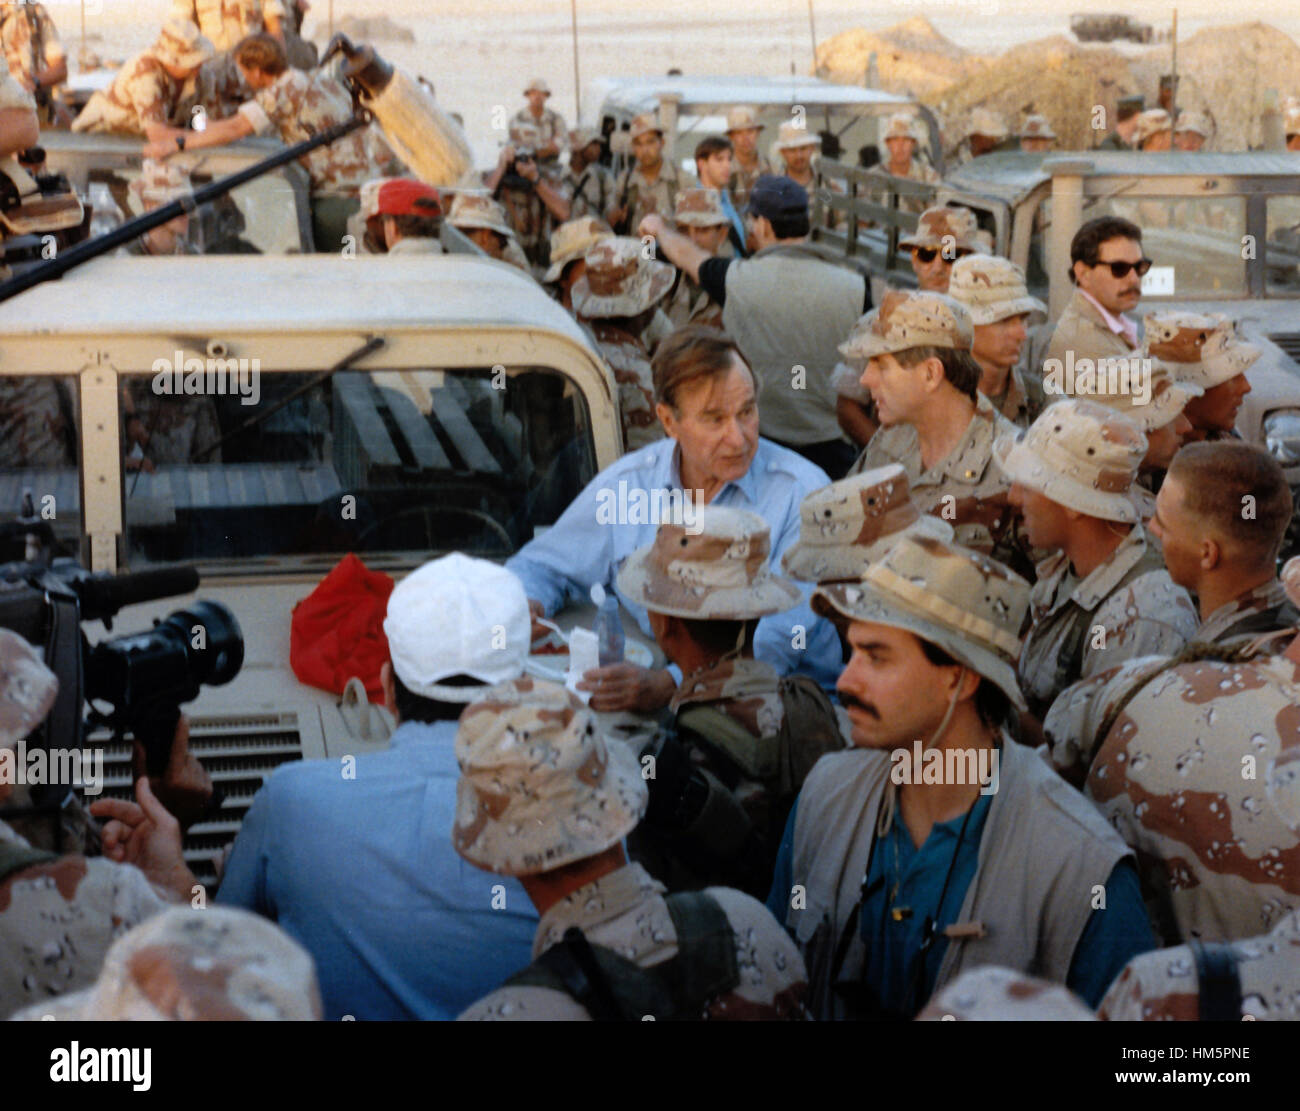 United States President George H.W. Bush shares a Thanksgiving holiday meal with US military personnel in Saudi Arabia on November 22, 1990. Mandatory Stock Photo